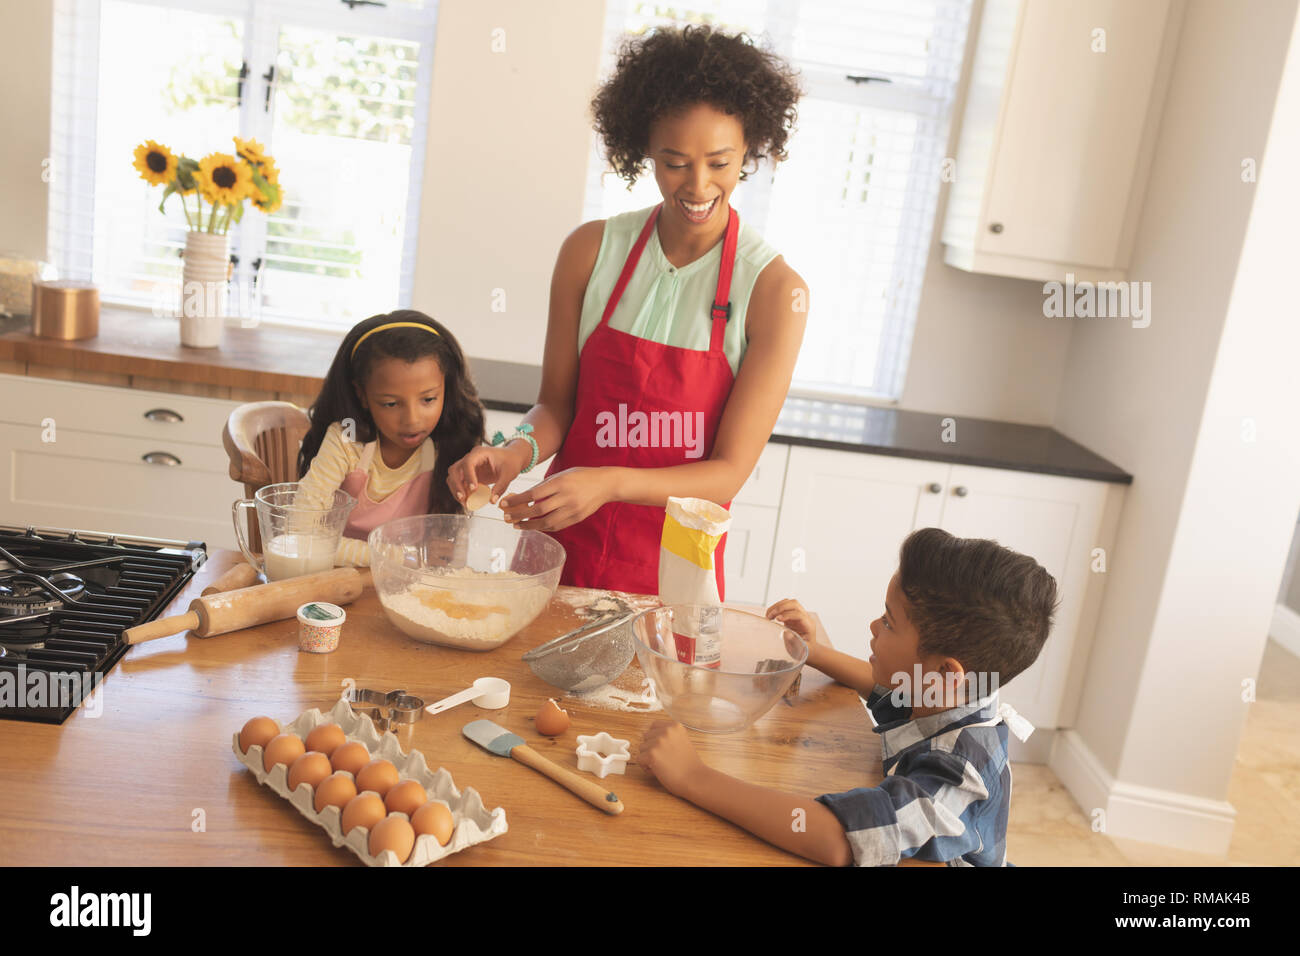 African American mother and children baking cookies in kitchen Stock Photo